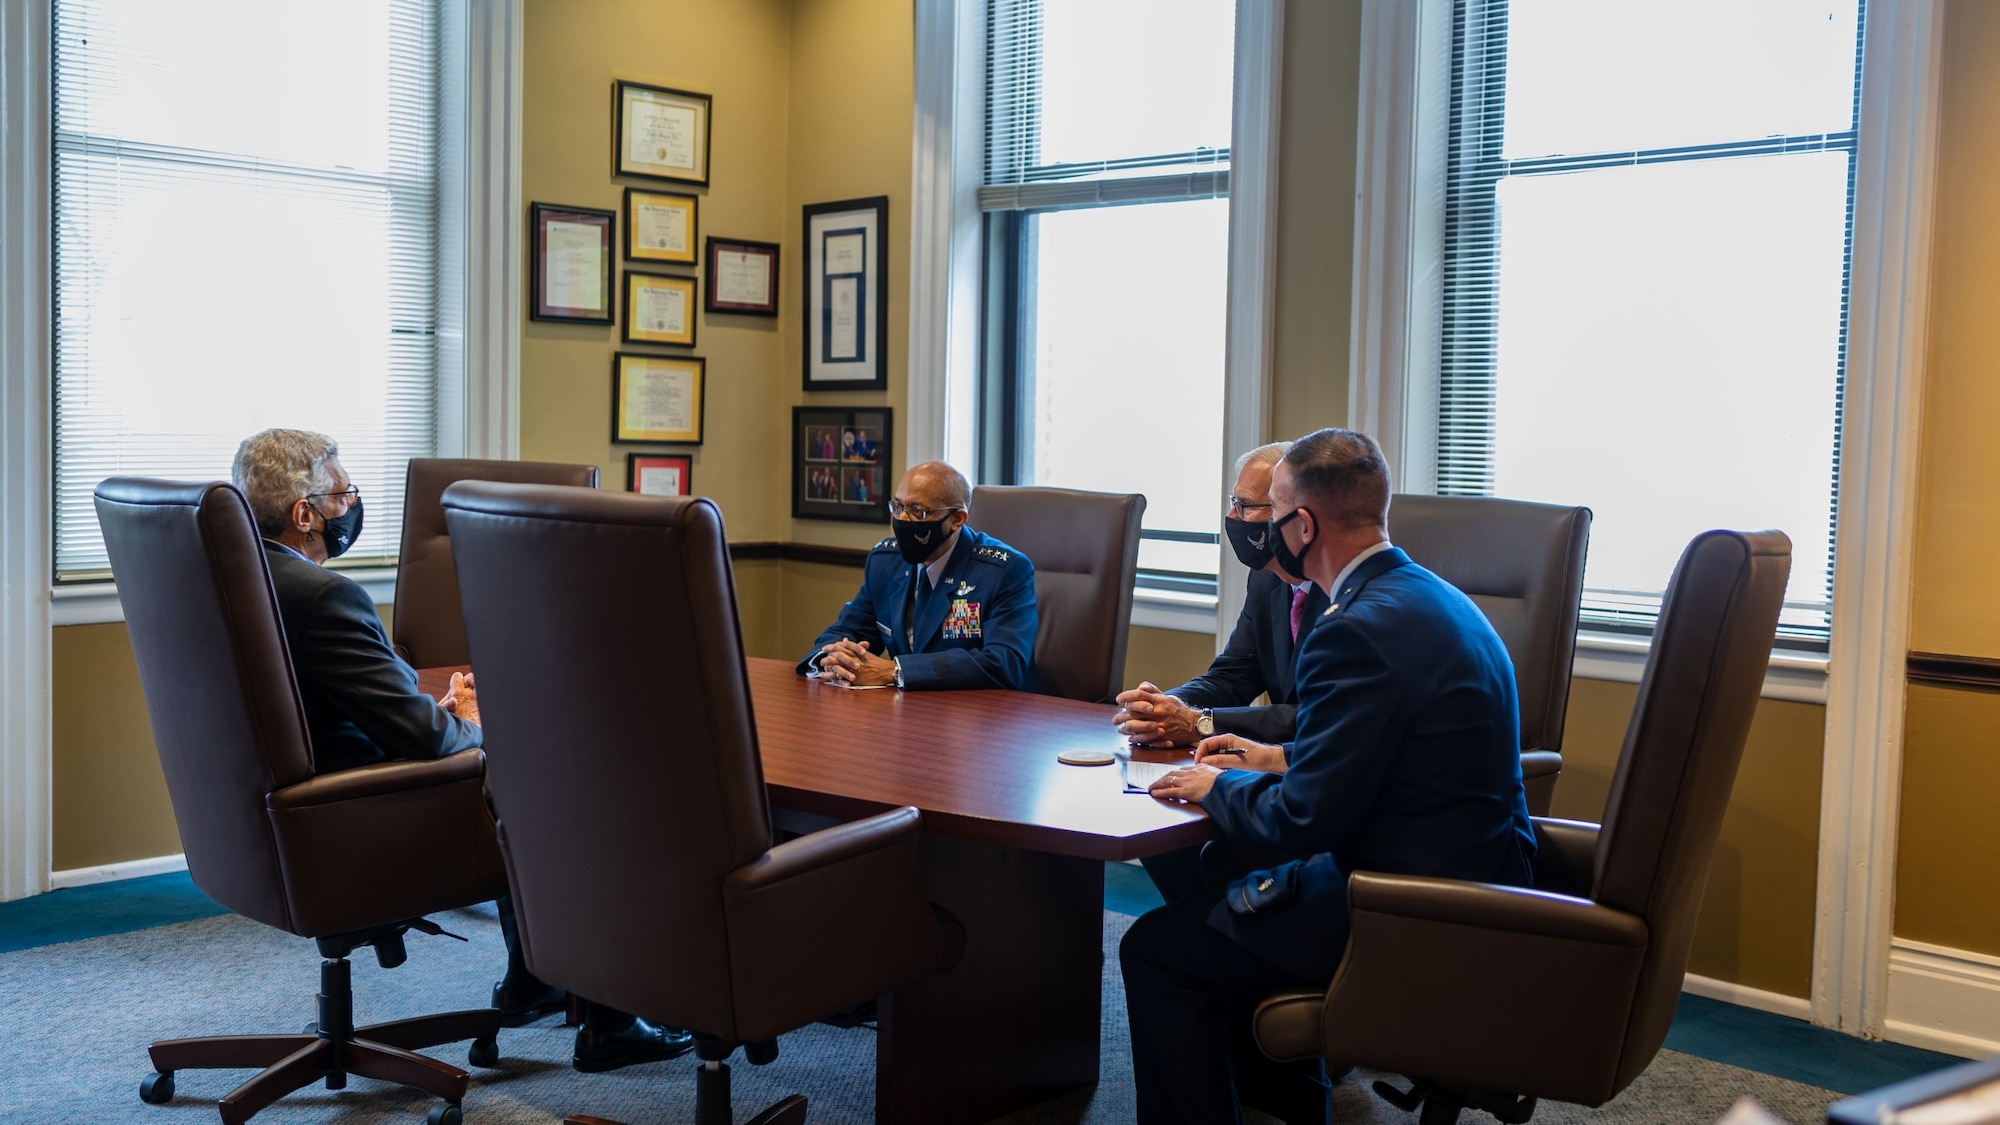 Air Force Chief of Staff Gen. Charles Q. Brown, Jr. talks with Dr. Fred Pestello, Saint Louis University
president, during a meeting at Saint Louis University, St. Louis, Missouri April 28, 2021. The leaders
discussed the critical relationship between the Air Force ROTC and the university as a host for the
program, including areas of mutual interest and cooperation. (U.S. Air Force photo by Cadet Phillip
Casey)